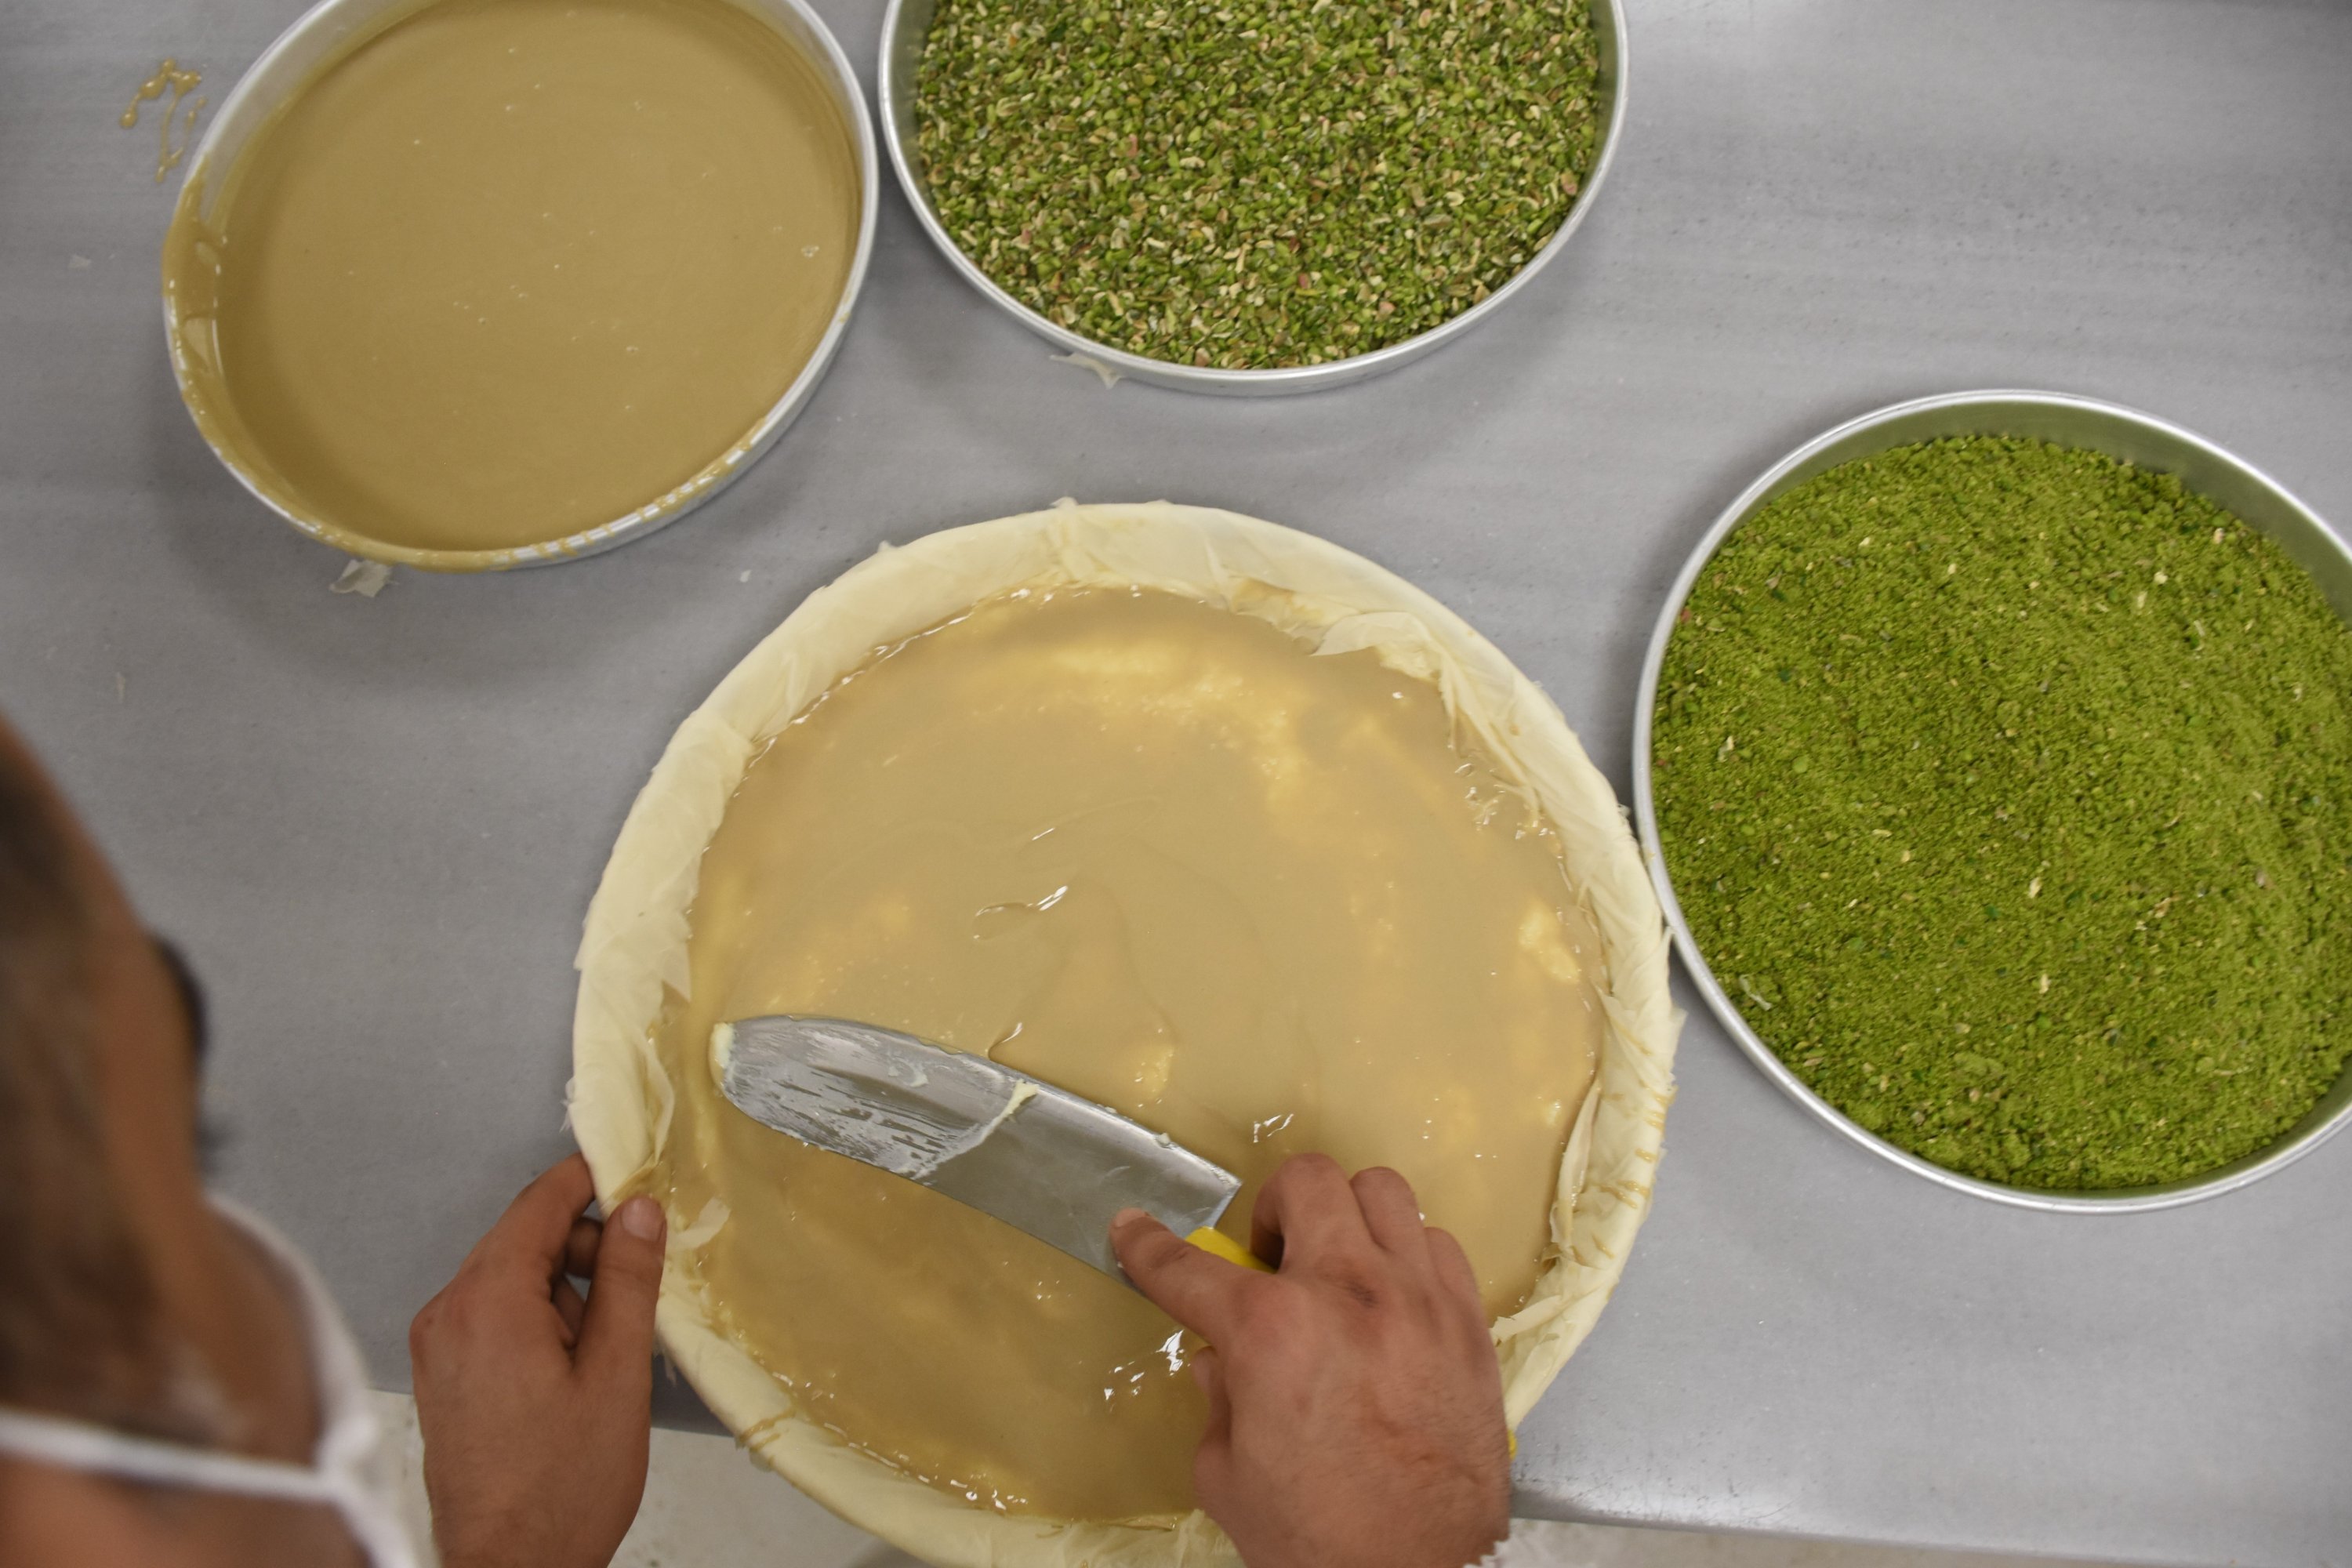 The new baklava, which combines classic pistachio baklava with clotted cream and tahini, has already proved a hit. (AA Photo)